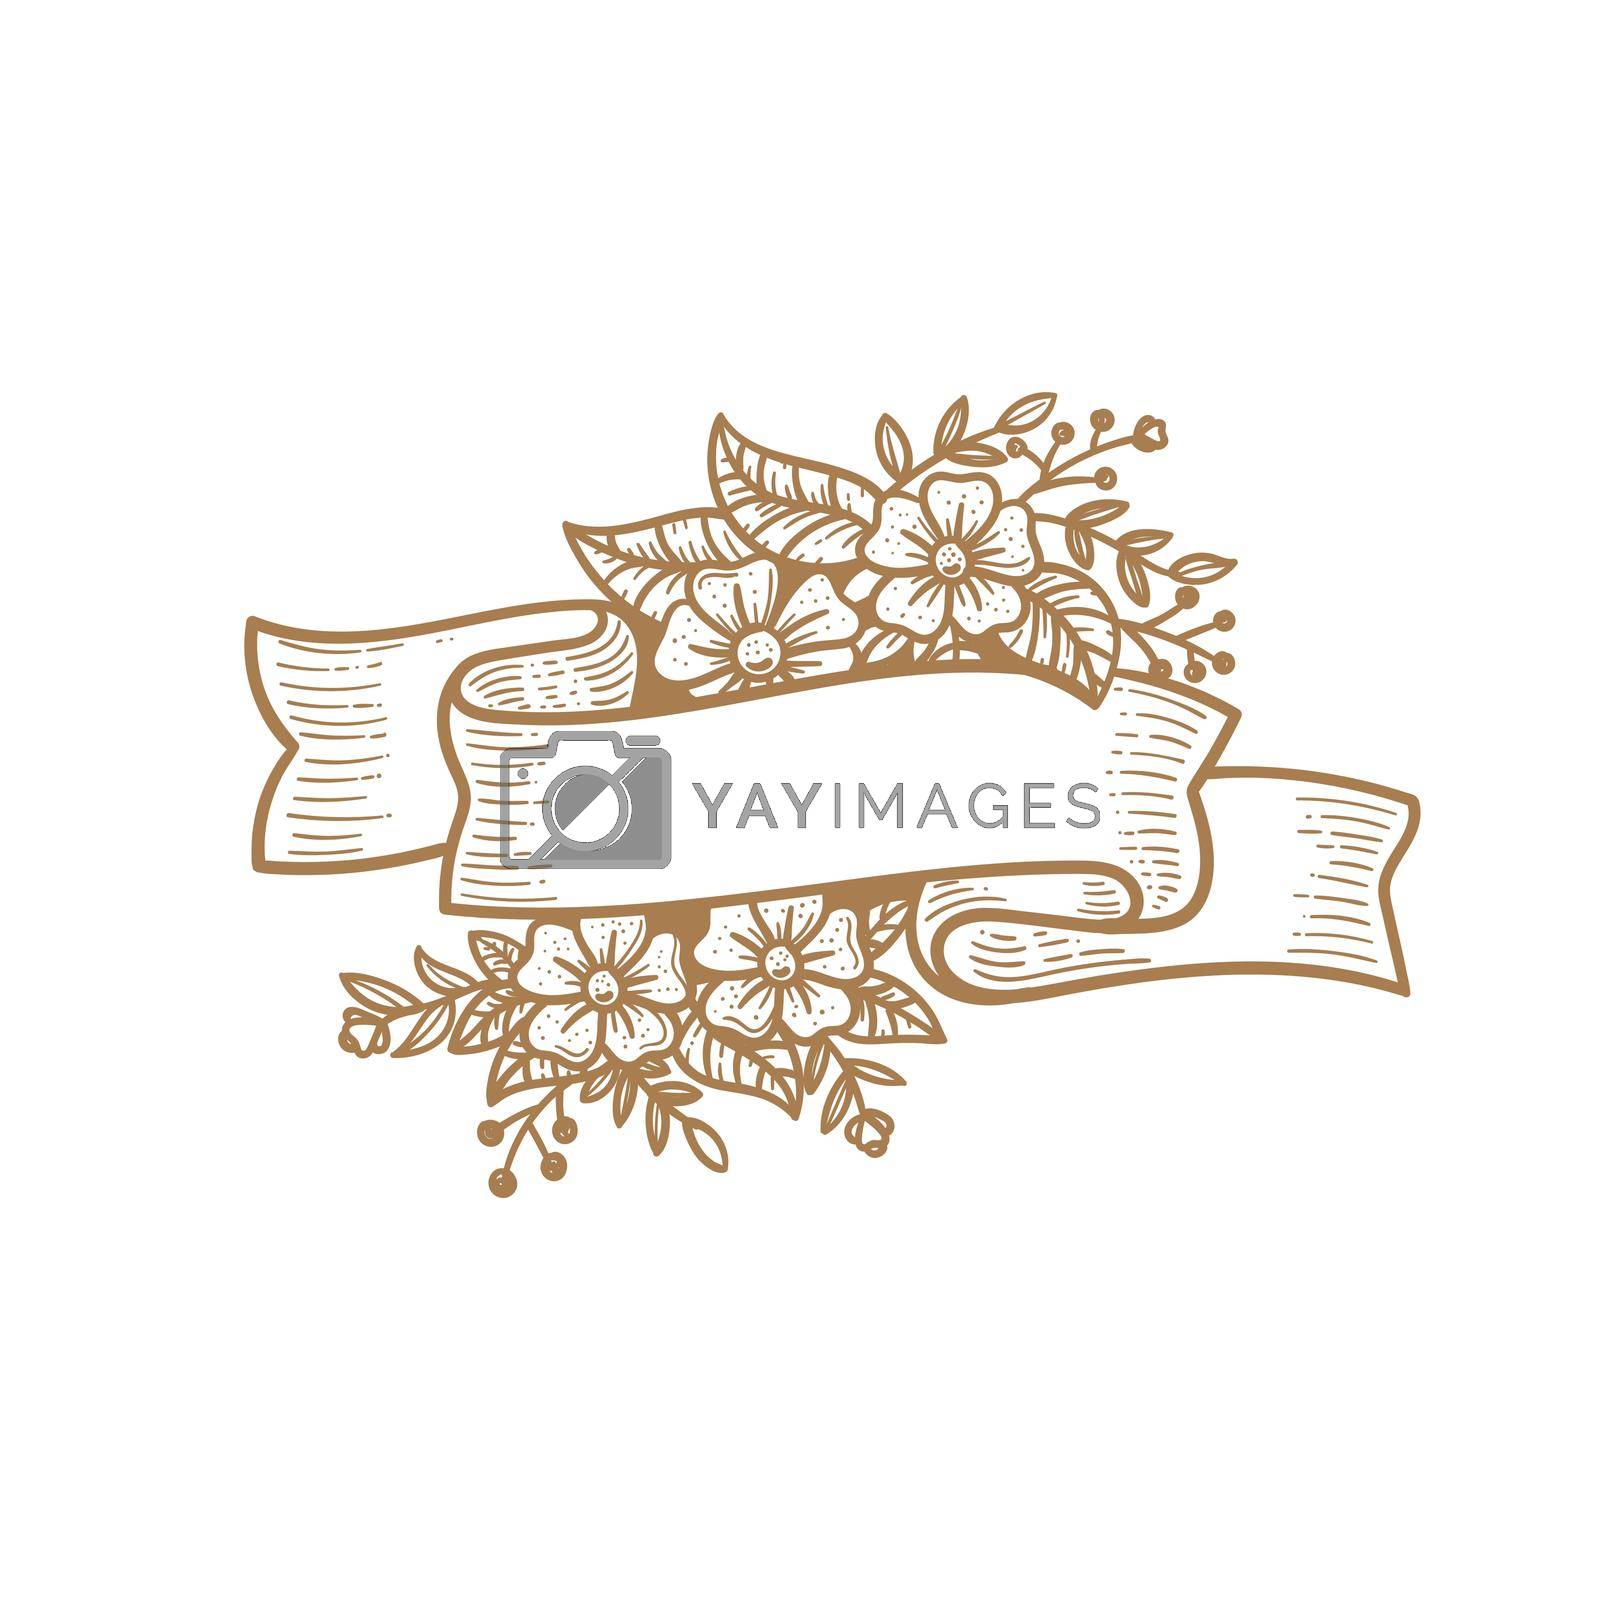 Royalty free image of Vintage hand drawn romantic Floral Ribbon by krustovin